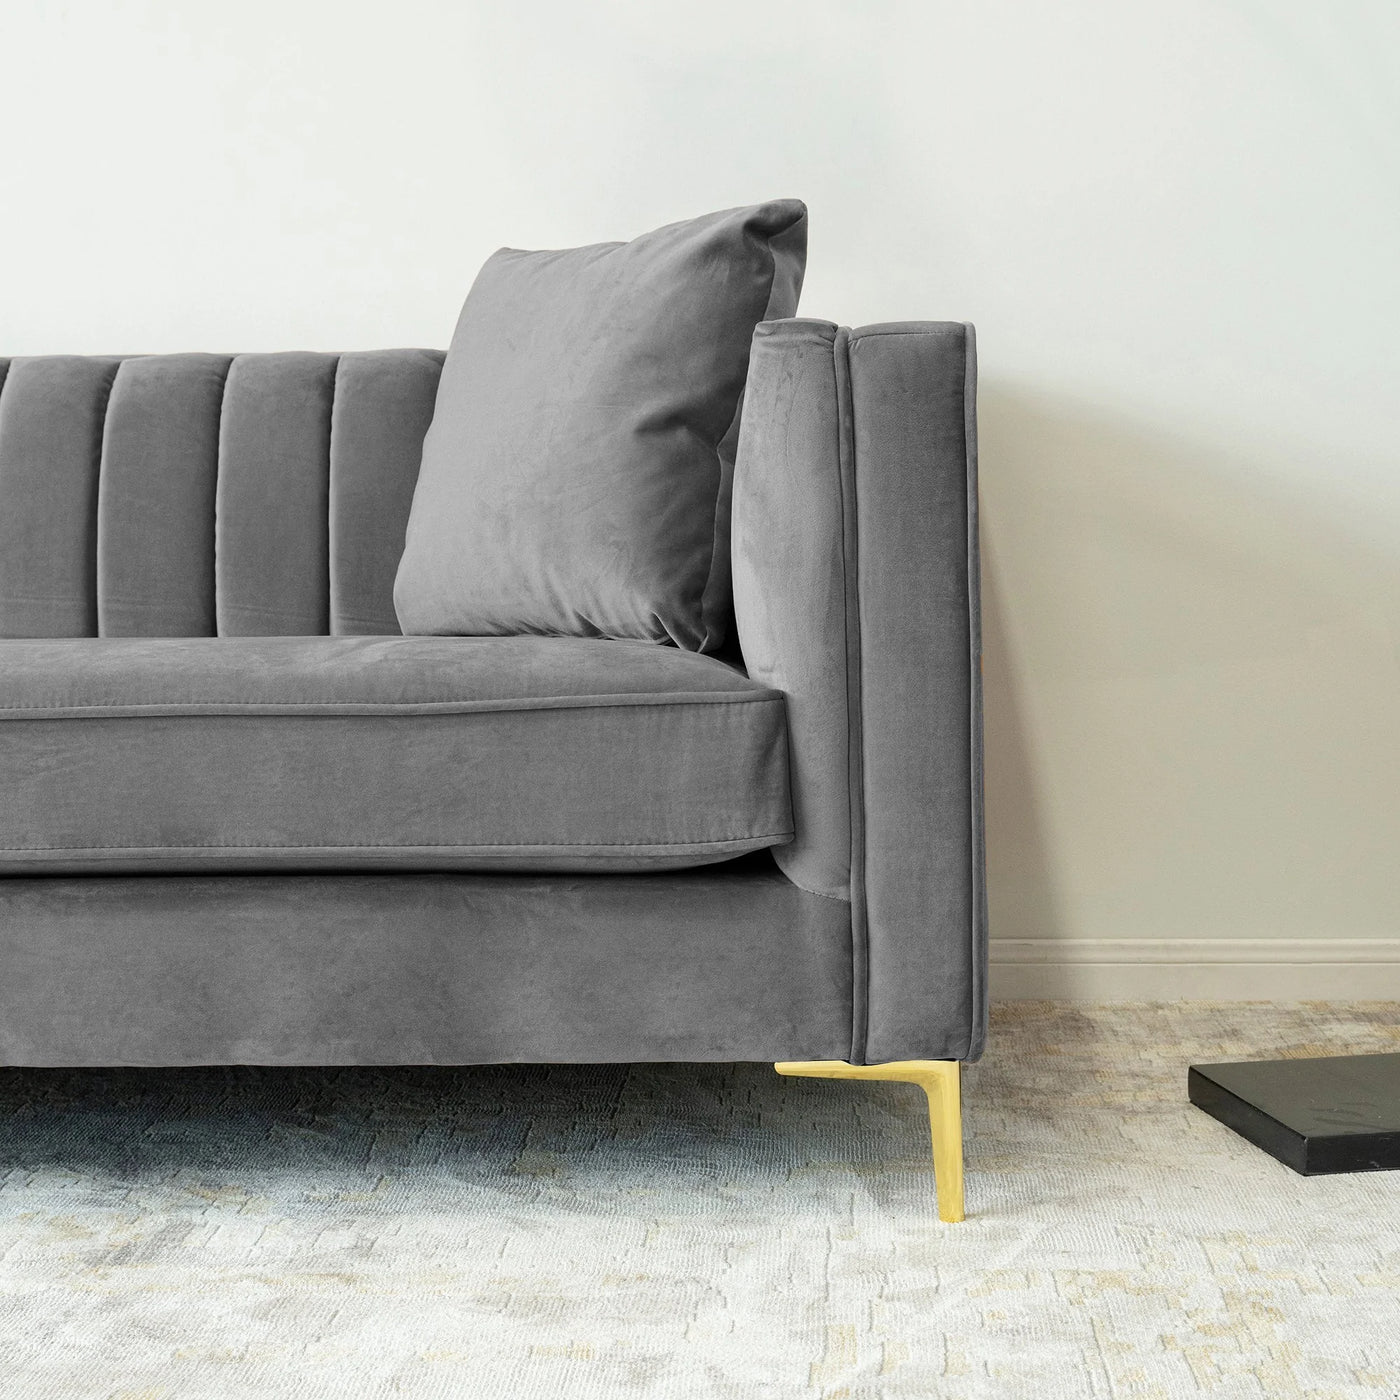 Mid-Century Tufted Rectangular Tight Back Velvet Upholstered Sofa in Gray with Gold Accents